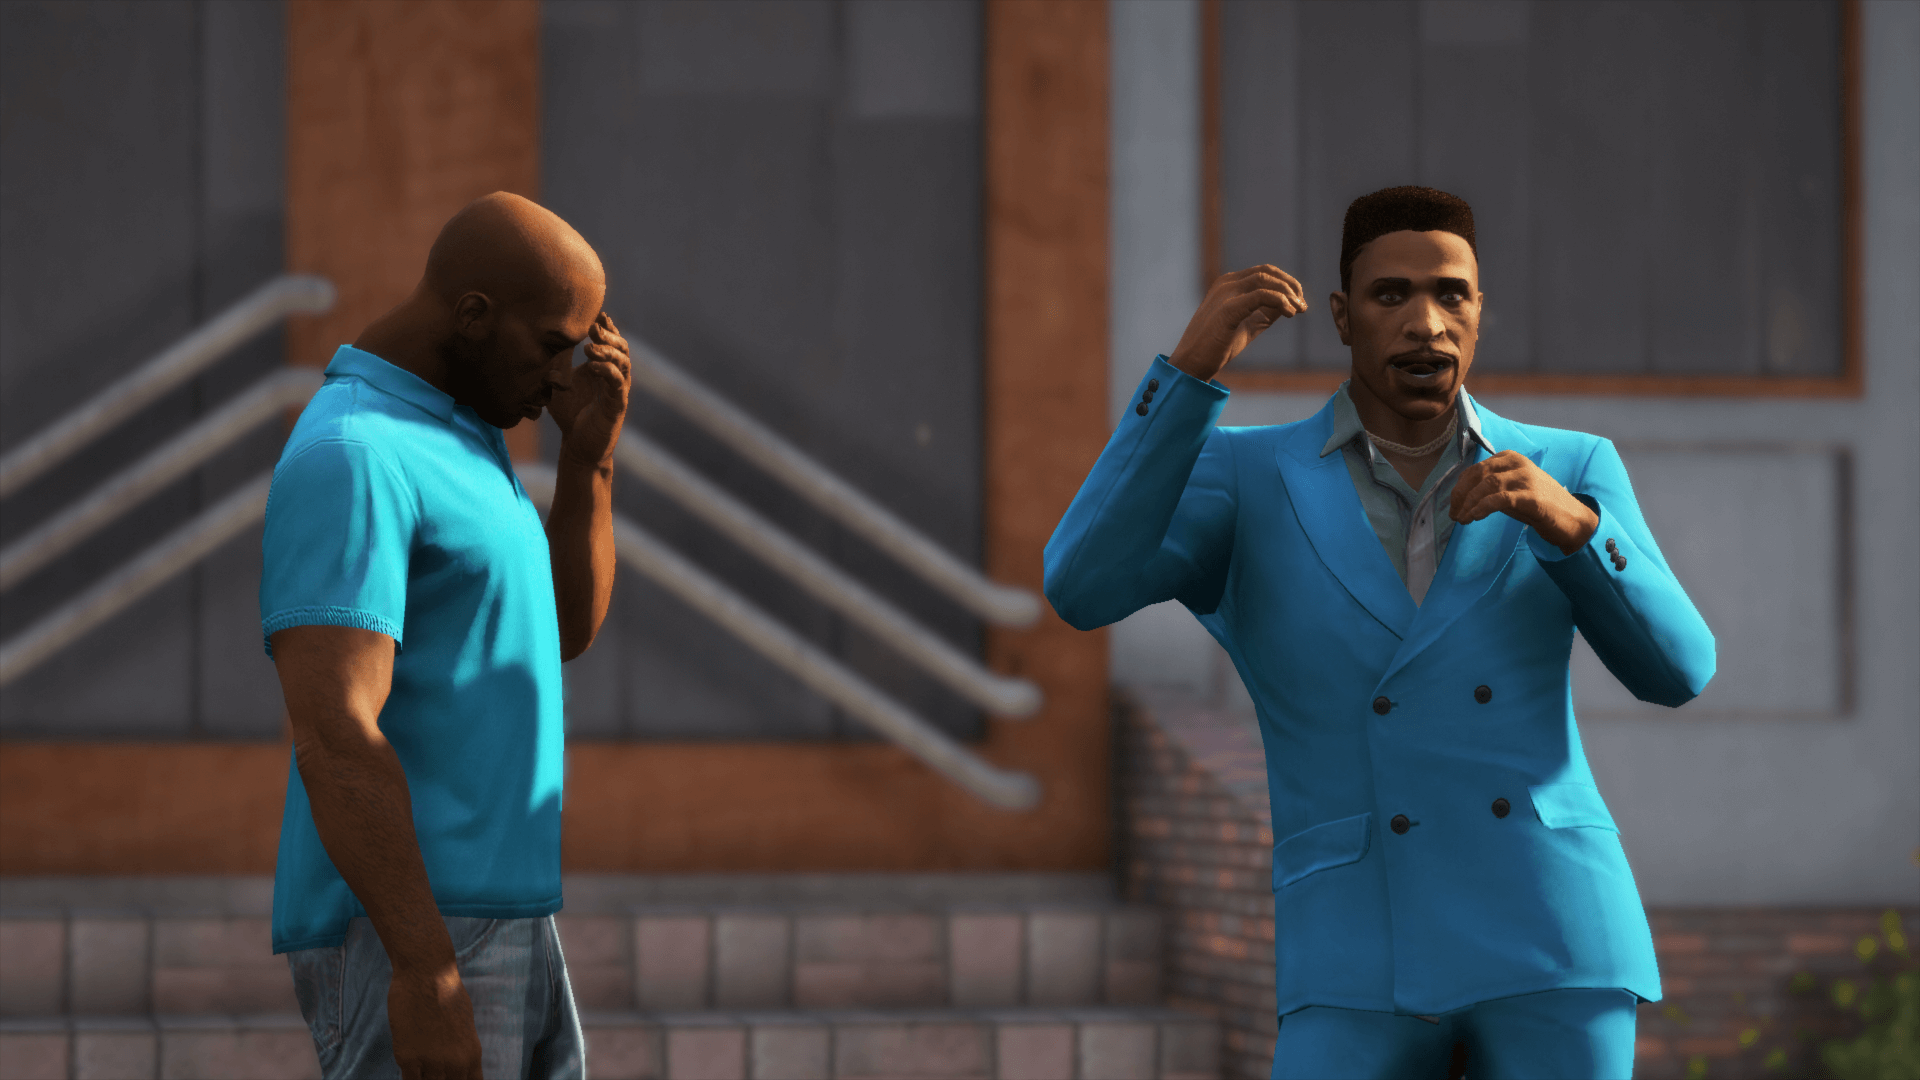 Download New Mr. Vercetti in LanceVanceDance-Style for GTA Vice City